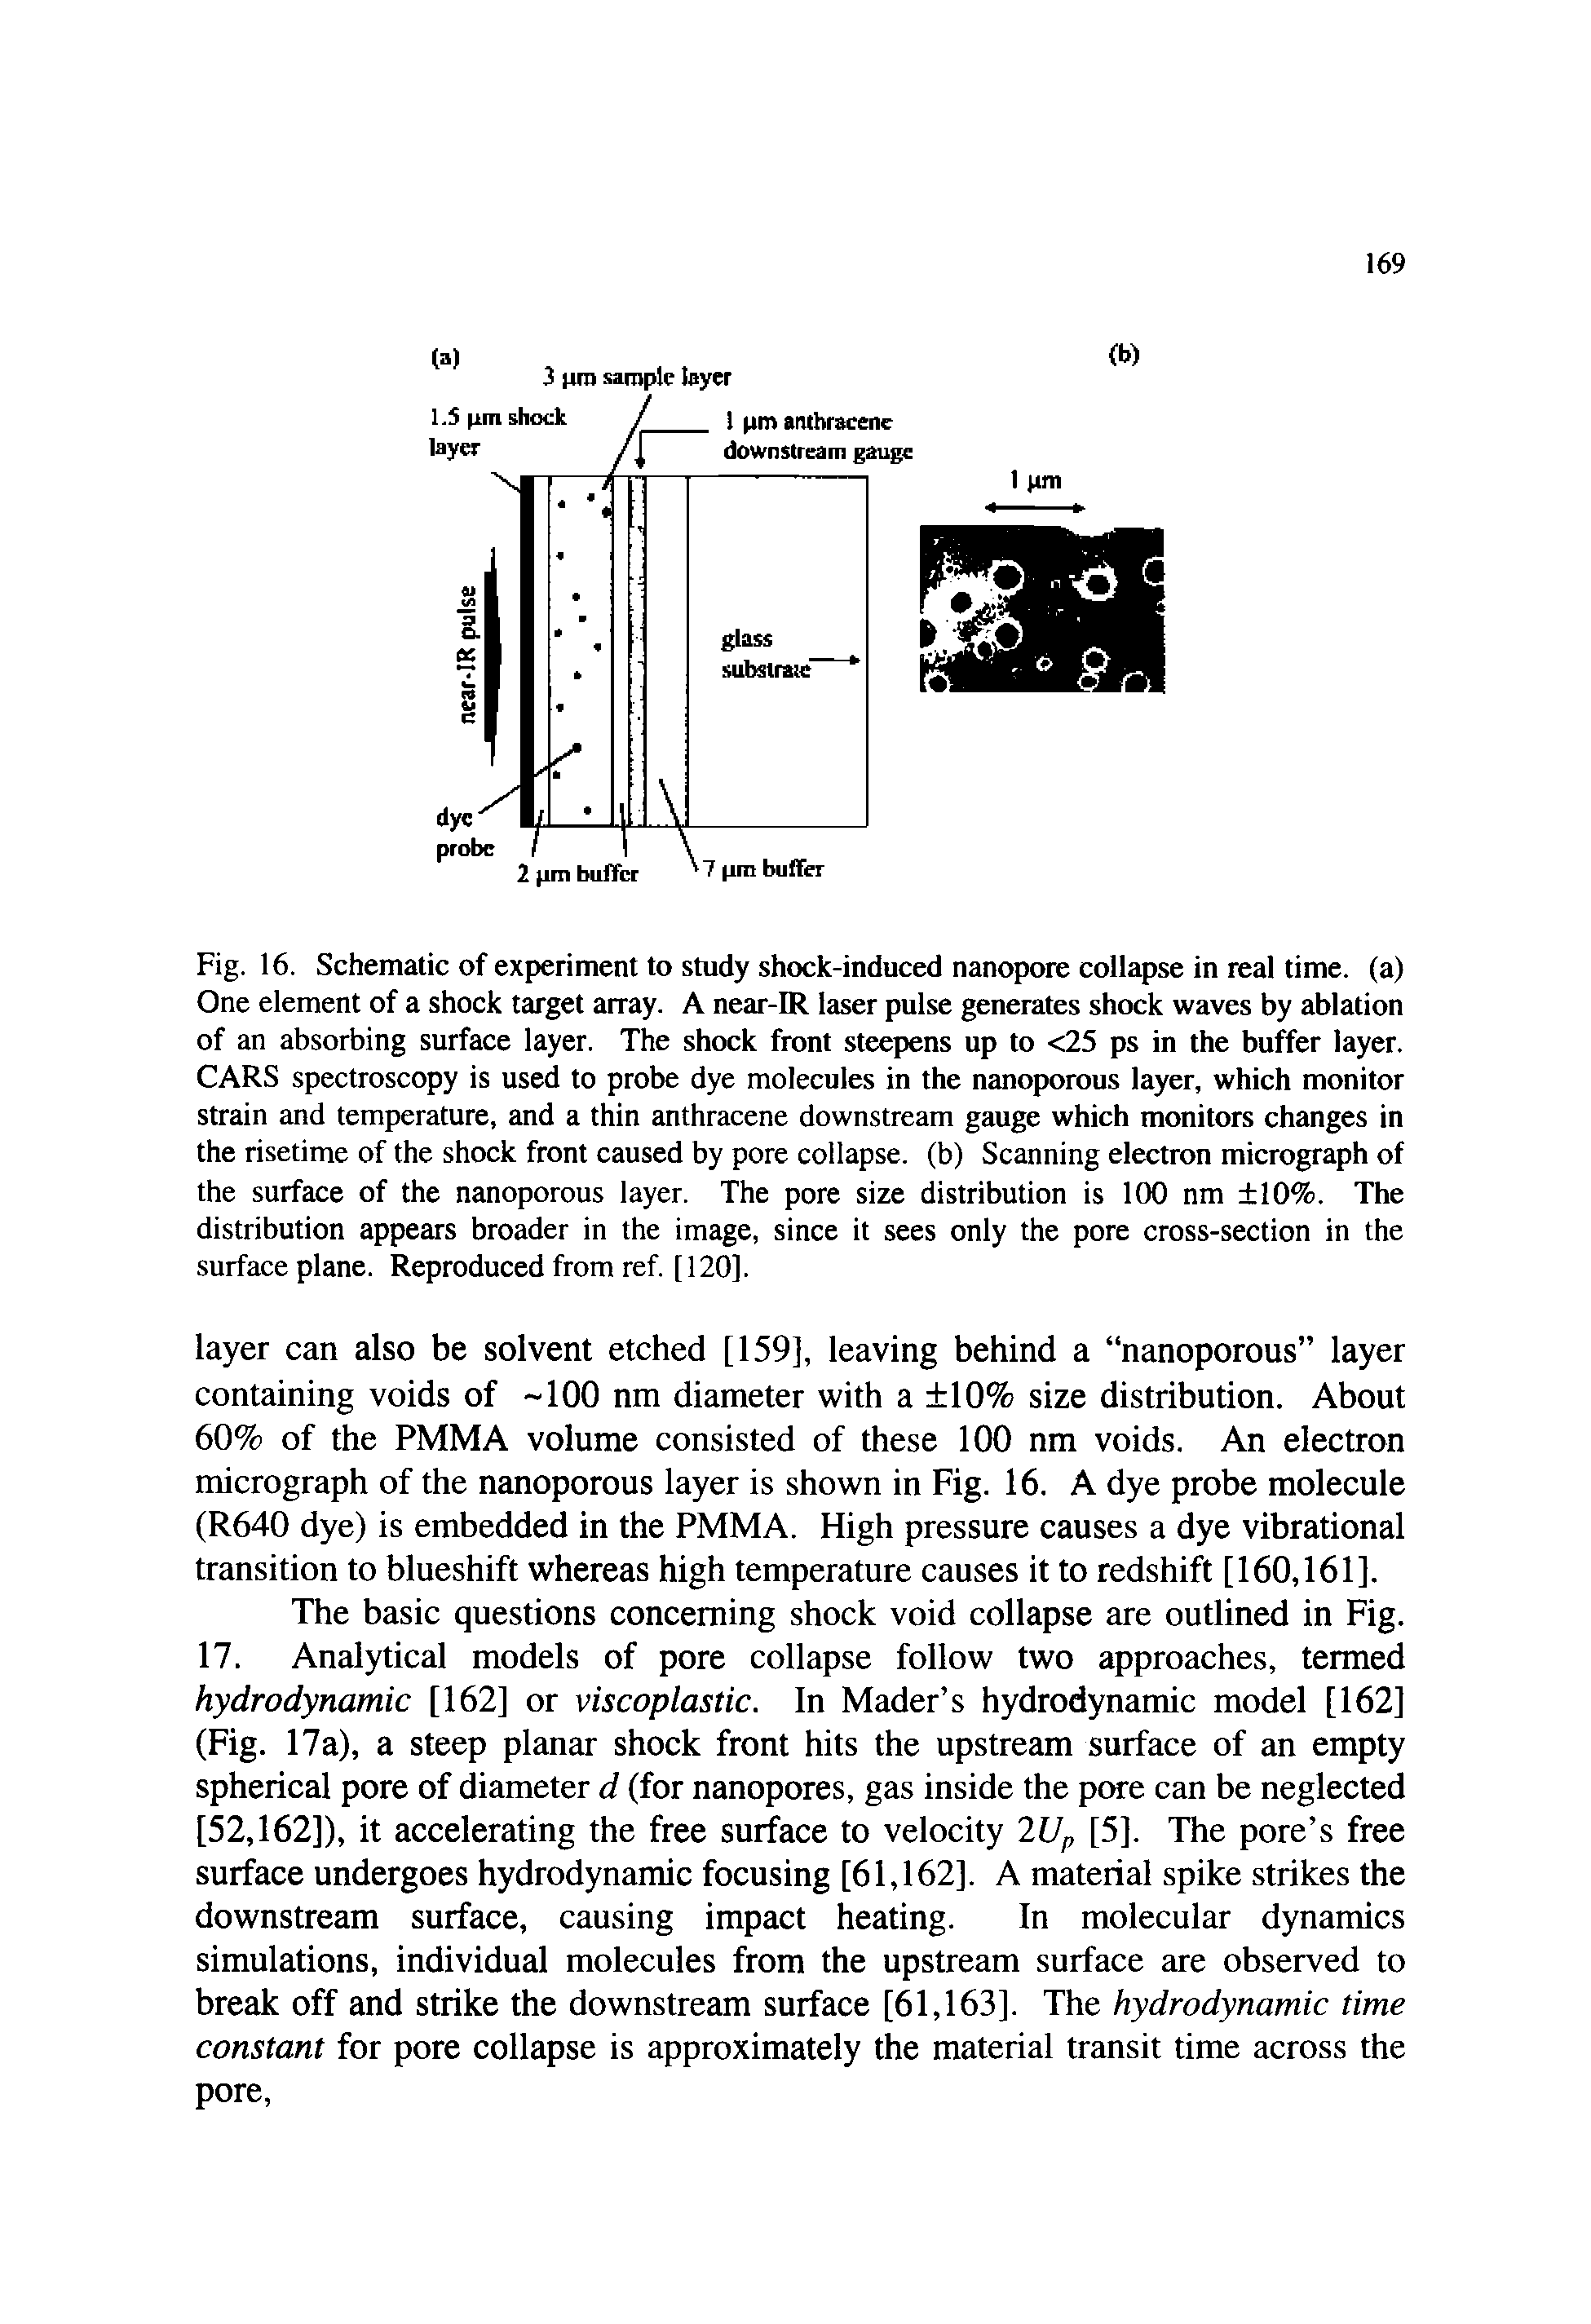 Fig. 16. Schematic of experiment to study shock-induced nanopore collapse in real time, (a) One element of a shock target array. A near-IR laser pulse generates shock waves by ablation of an absorbing surface layer. The shock front steepens up to <25 ps in the buffer layer. CARS spectroscopy is used to probe dye molecules in the nanoporous layer, which monitor strain and temperature, and a thin anthracene downstream gauge which monitors changes in the risetime of the shock front caused by pore collapse, (b) Scanning electron micrograph of the surface of the nanoporous layer. The pore size distribution is 100 nm 10%. The distribution appears broader in the image, since it sees only the pore cross-section in the surface plane. Reproduced from ref. [120].